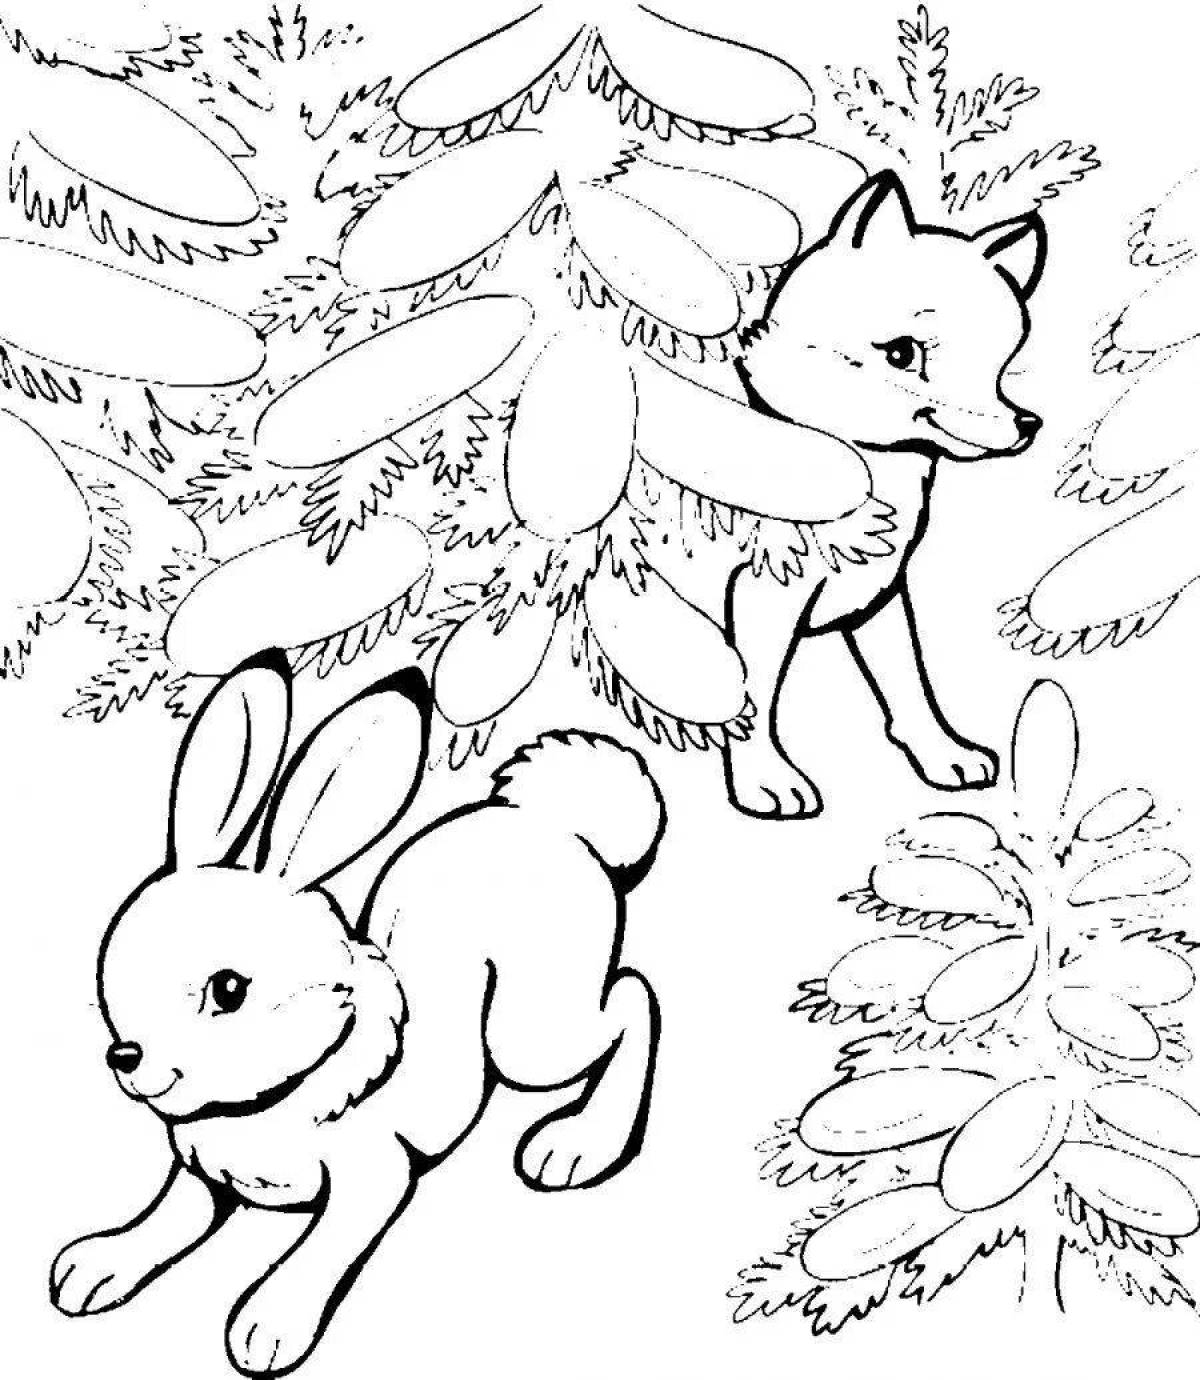 Shiny winter animals coloring book for 3-4 year olds